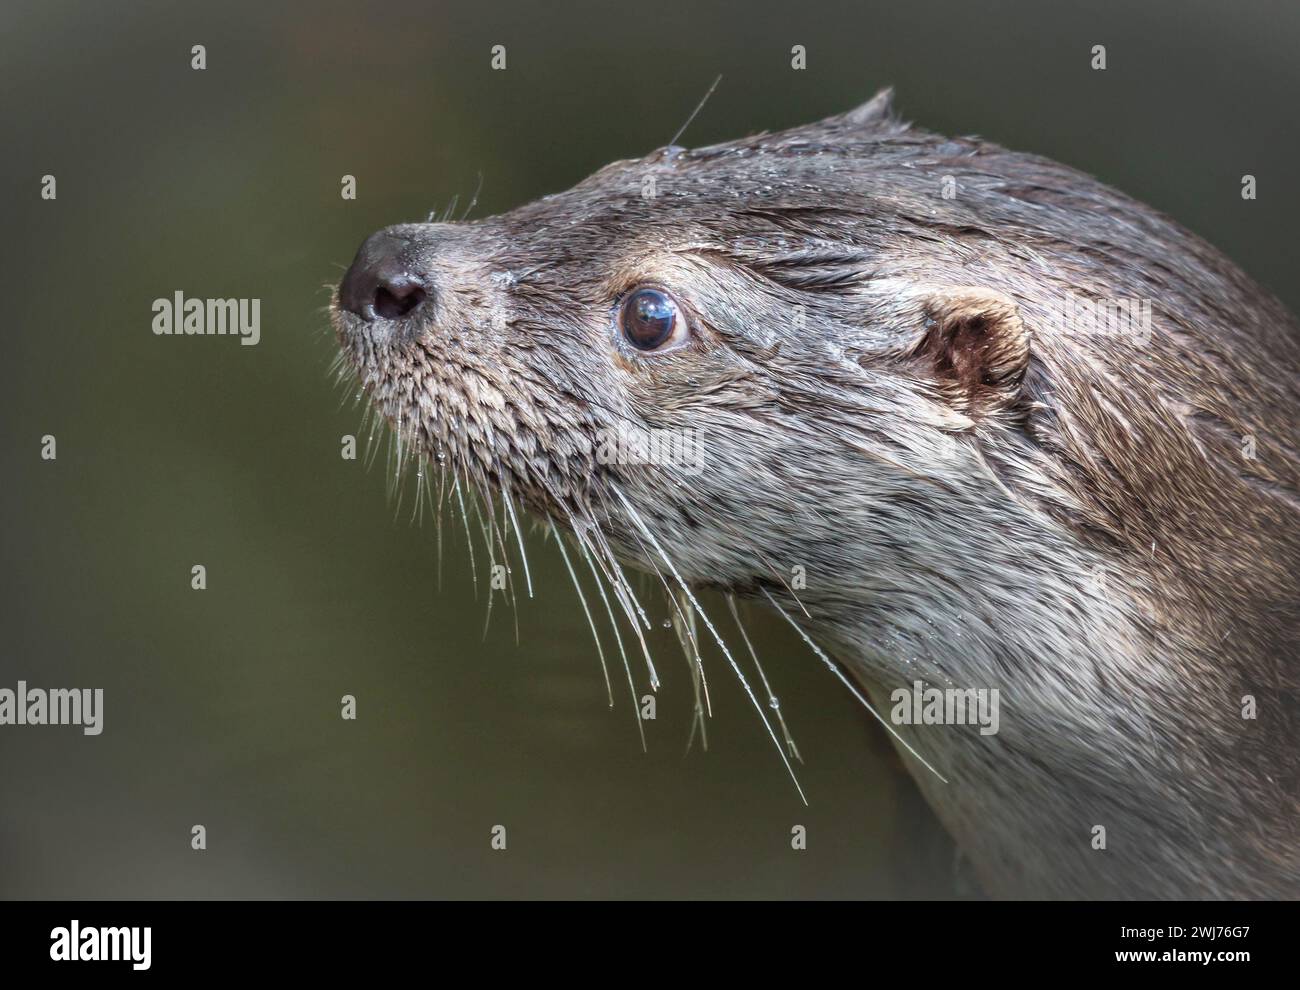 Otter Portrait in profile and close up with blurred background and fine fur detail Stock Photo